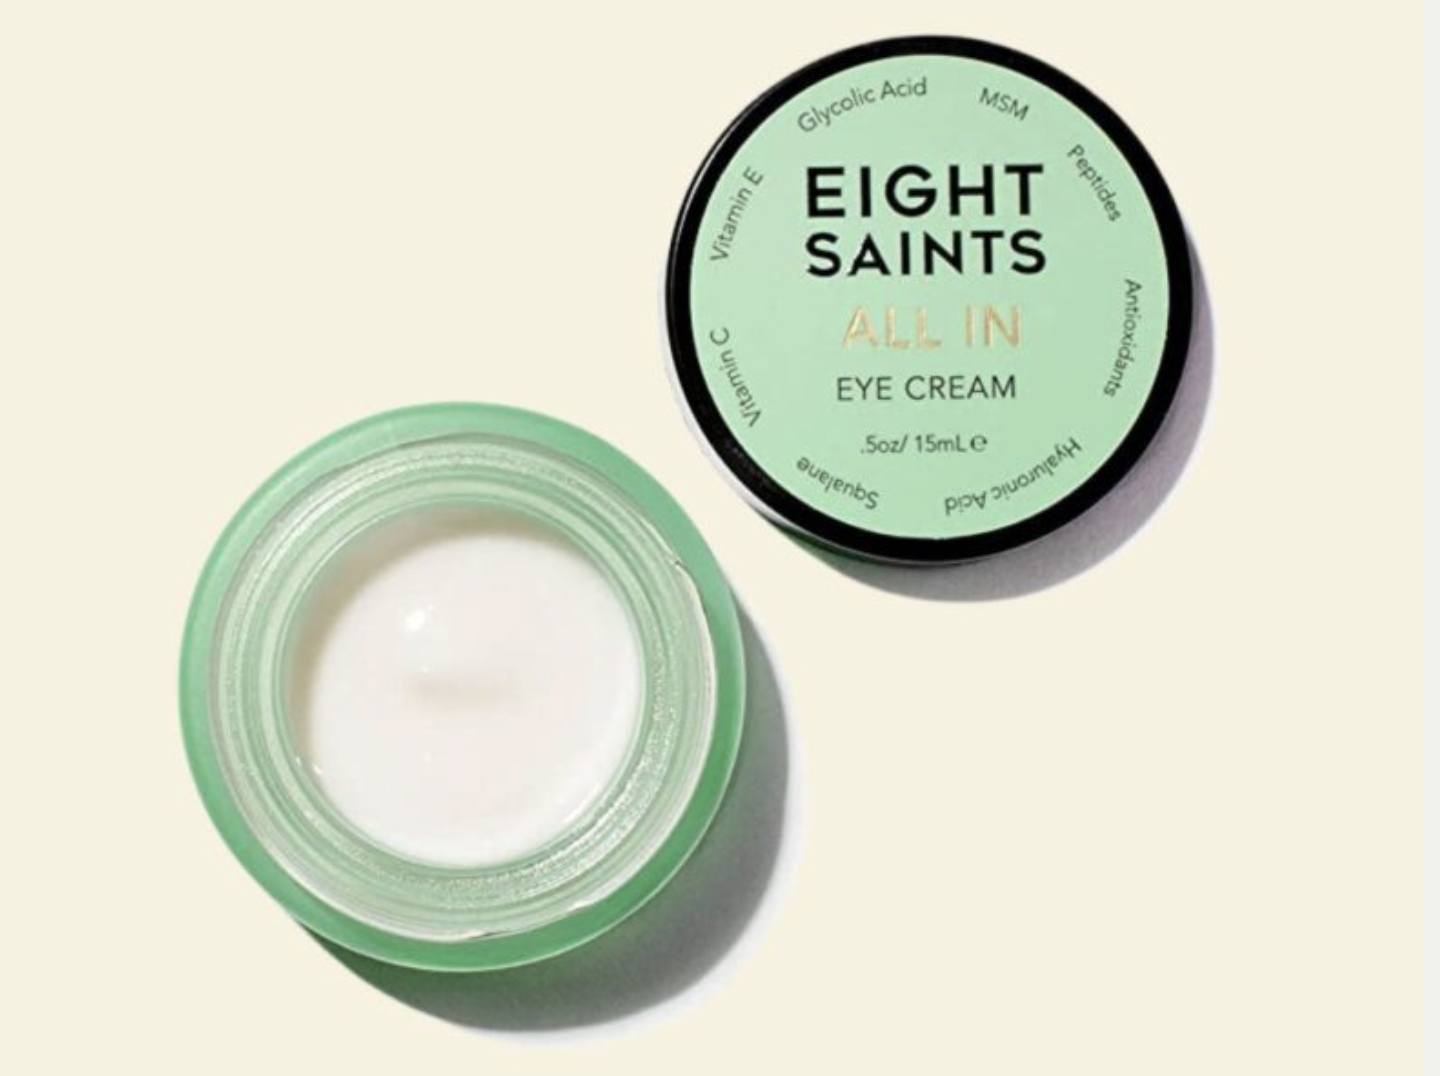 Suggest | With Only 8 Ingredients, Shoppers Praise This All-In-One Eye Cream For Delivering Noticeable Results Fast